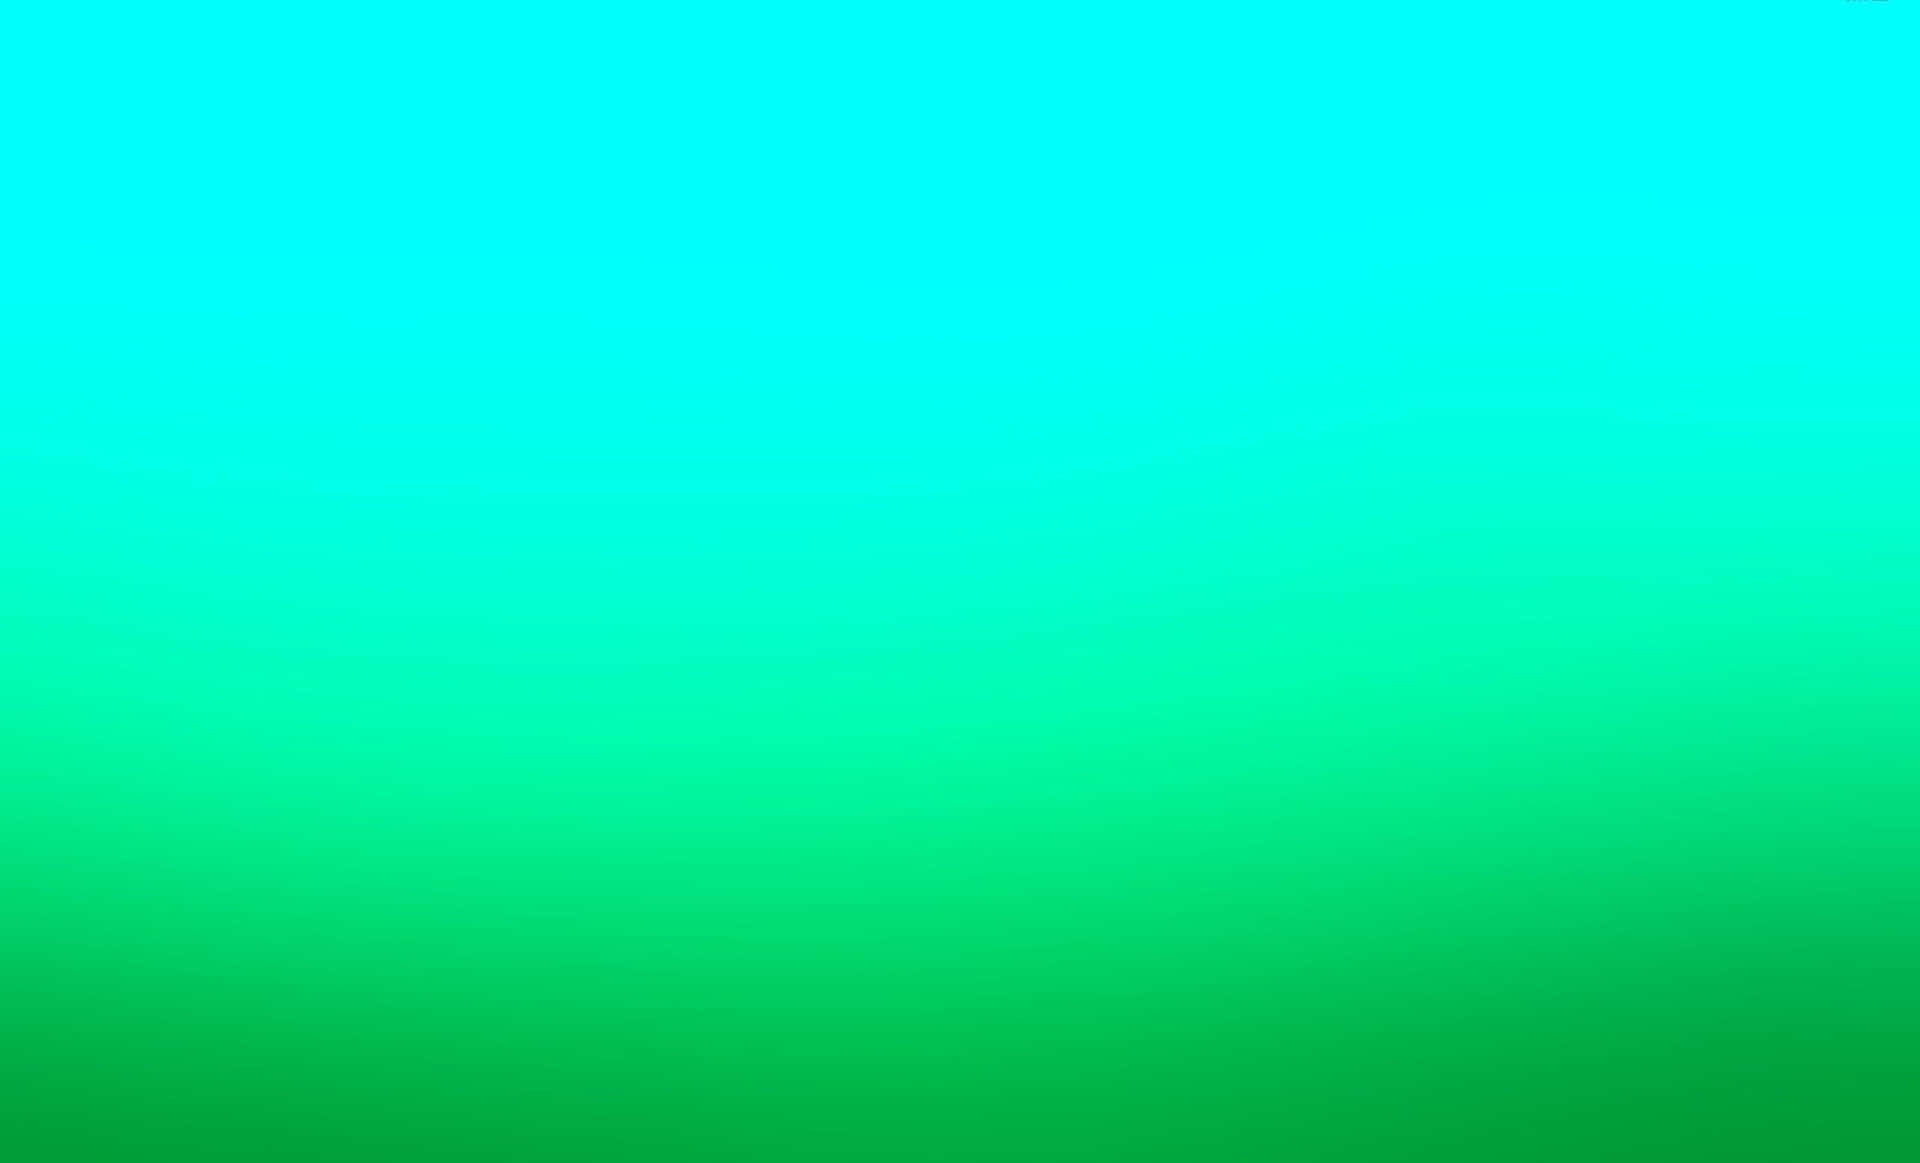 An abstract blue and green background.